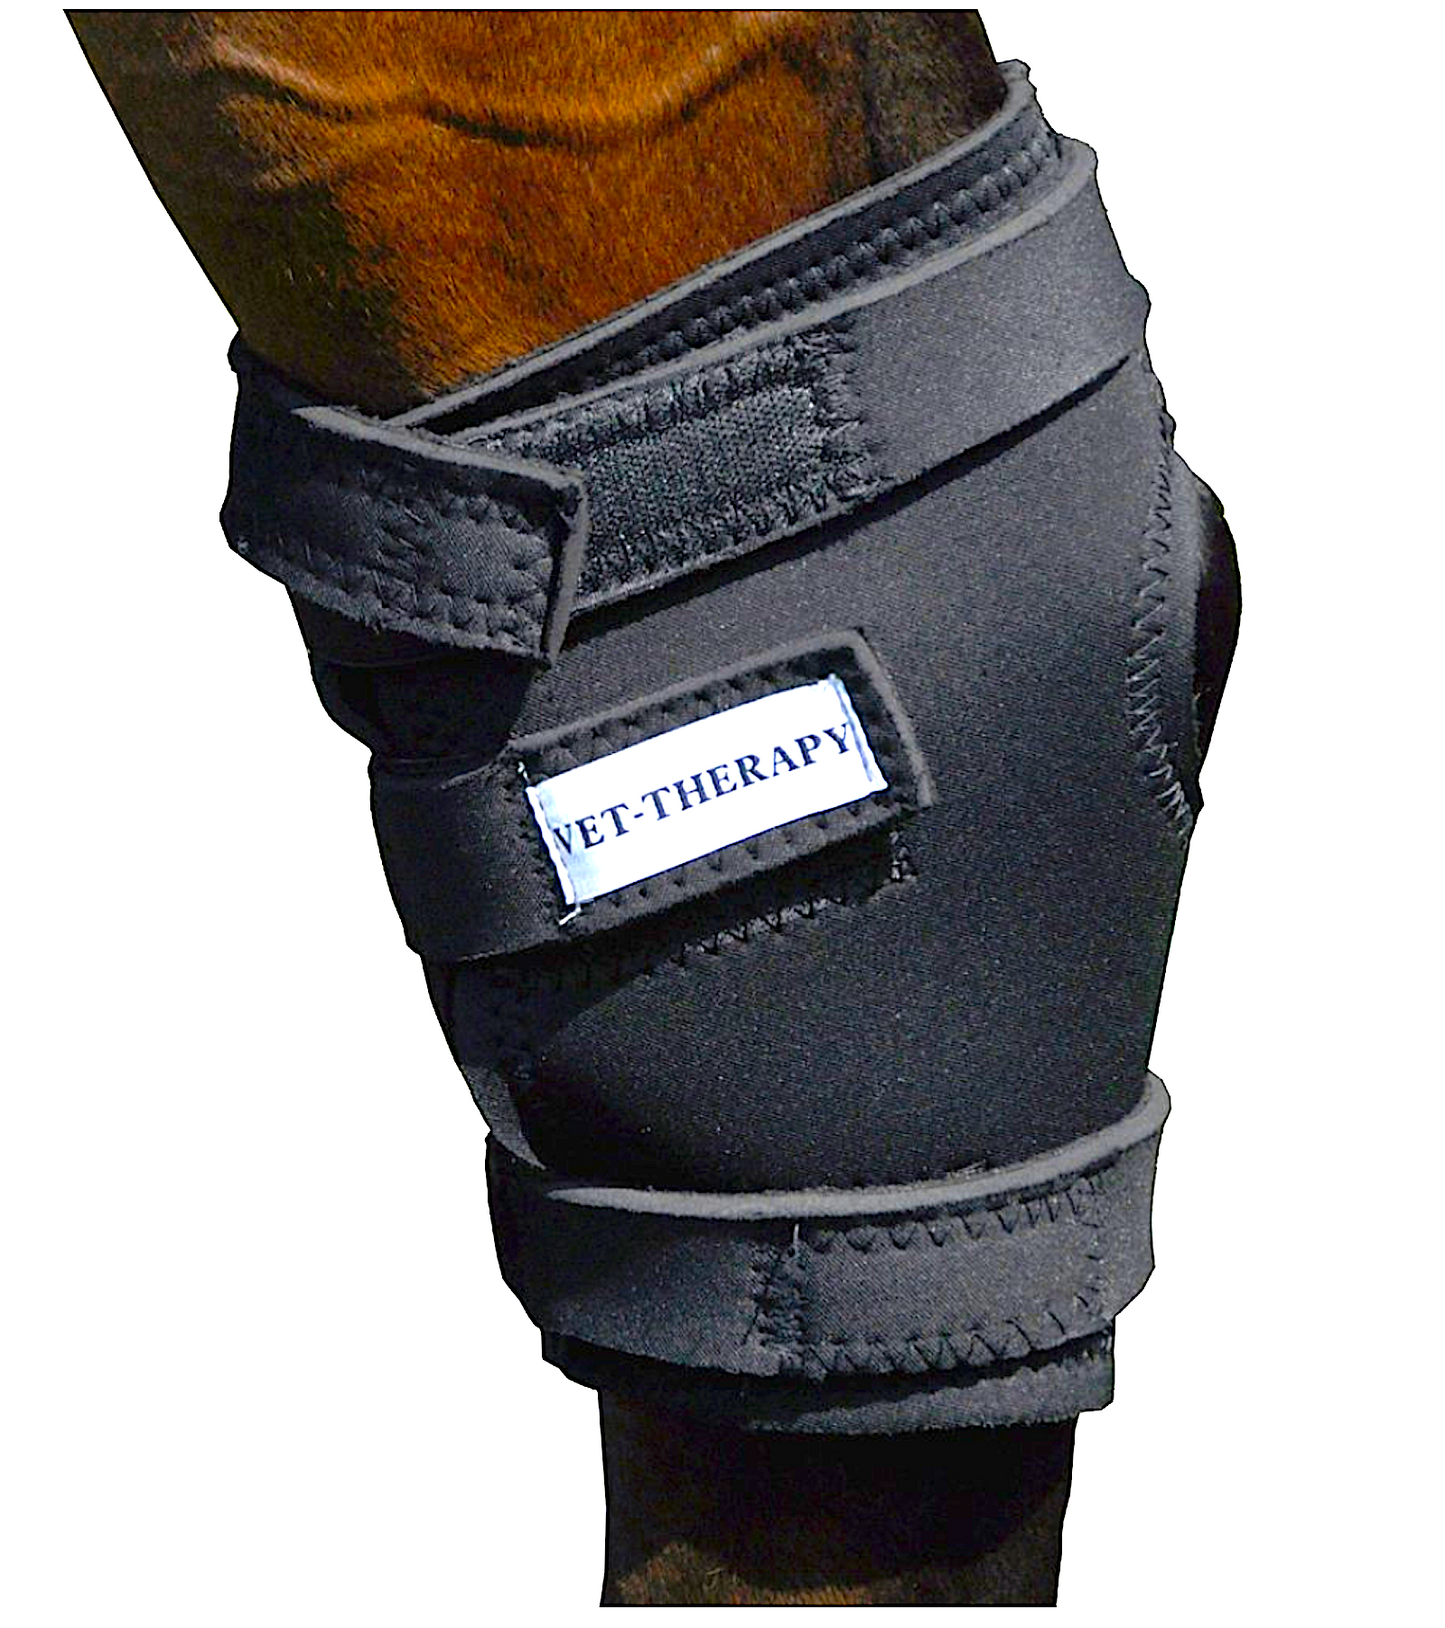 VET THERAPY THERAPEUTIC HOCK SUPPORT: with FIR-far infrared fleece-lined neoprene